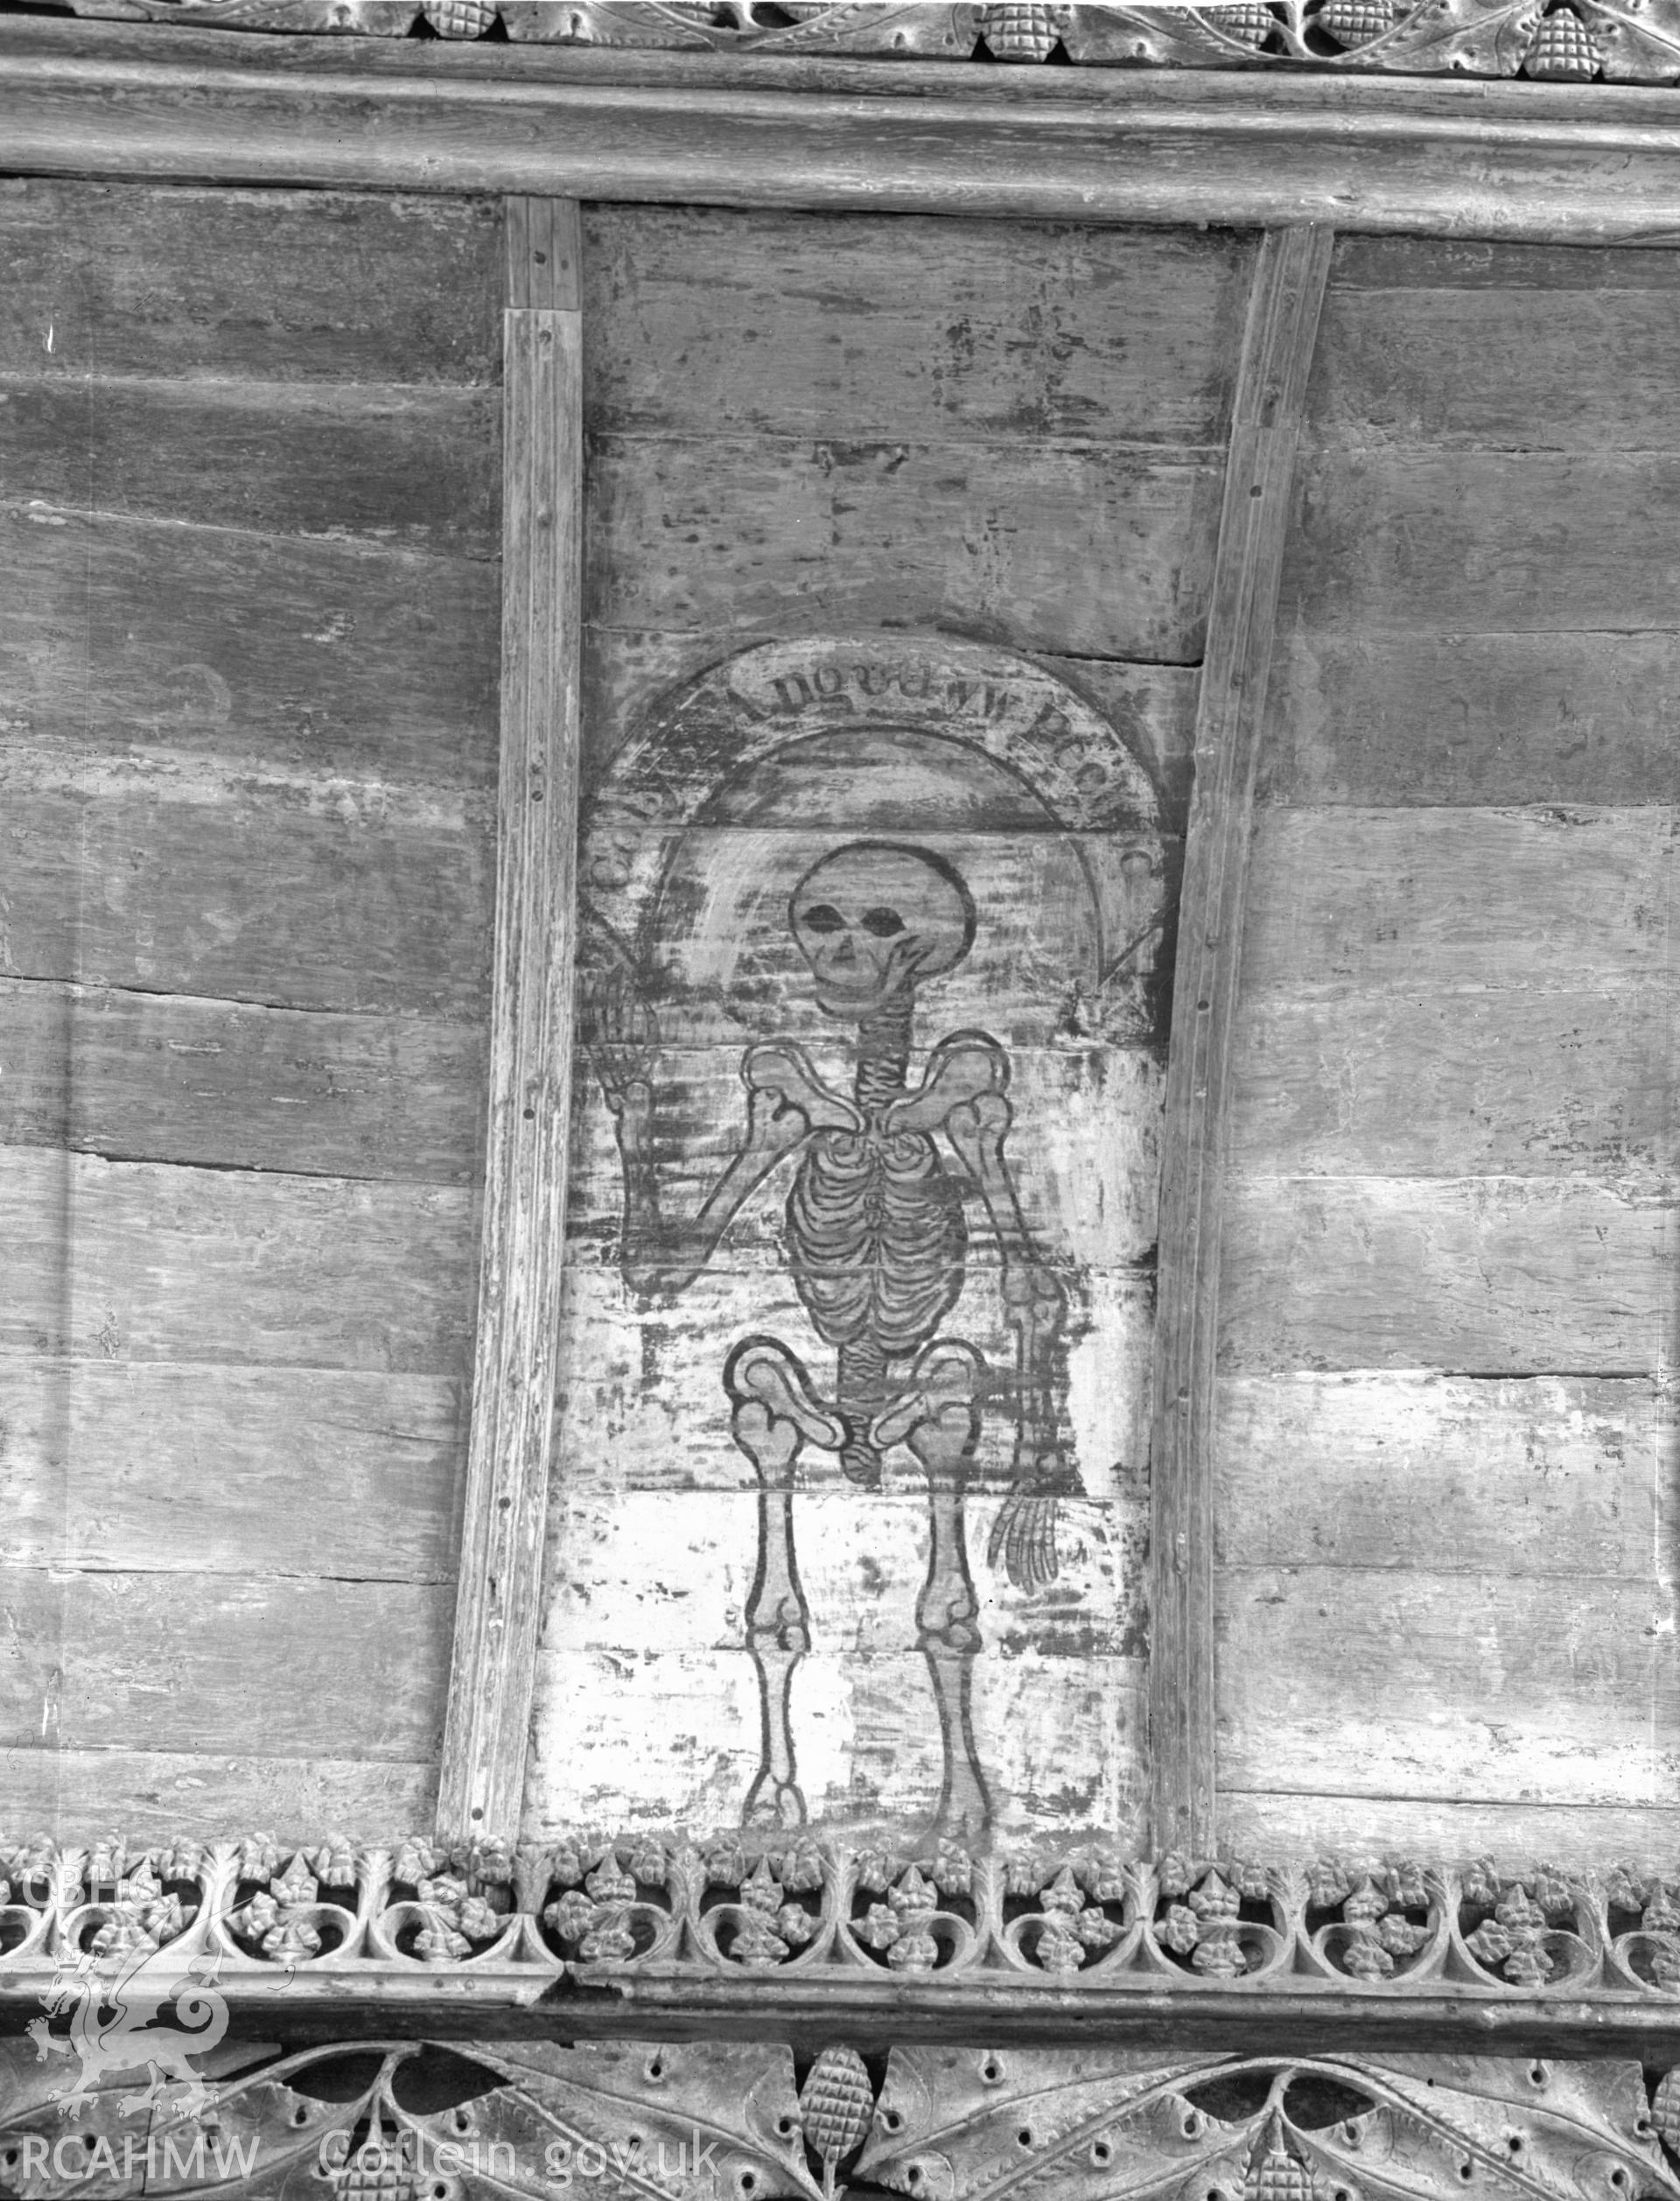 Acetate negative showing wall painting at Llaneilian Church.